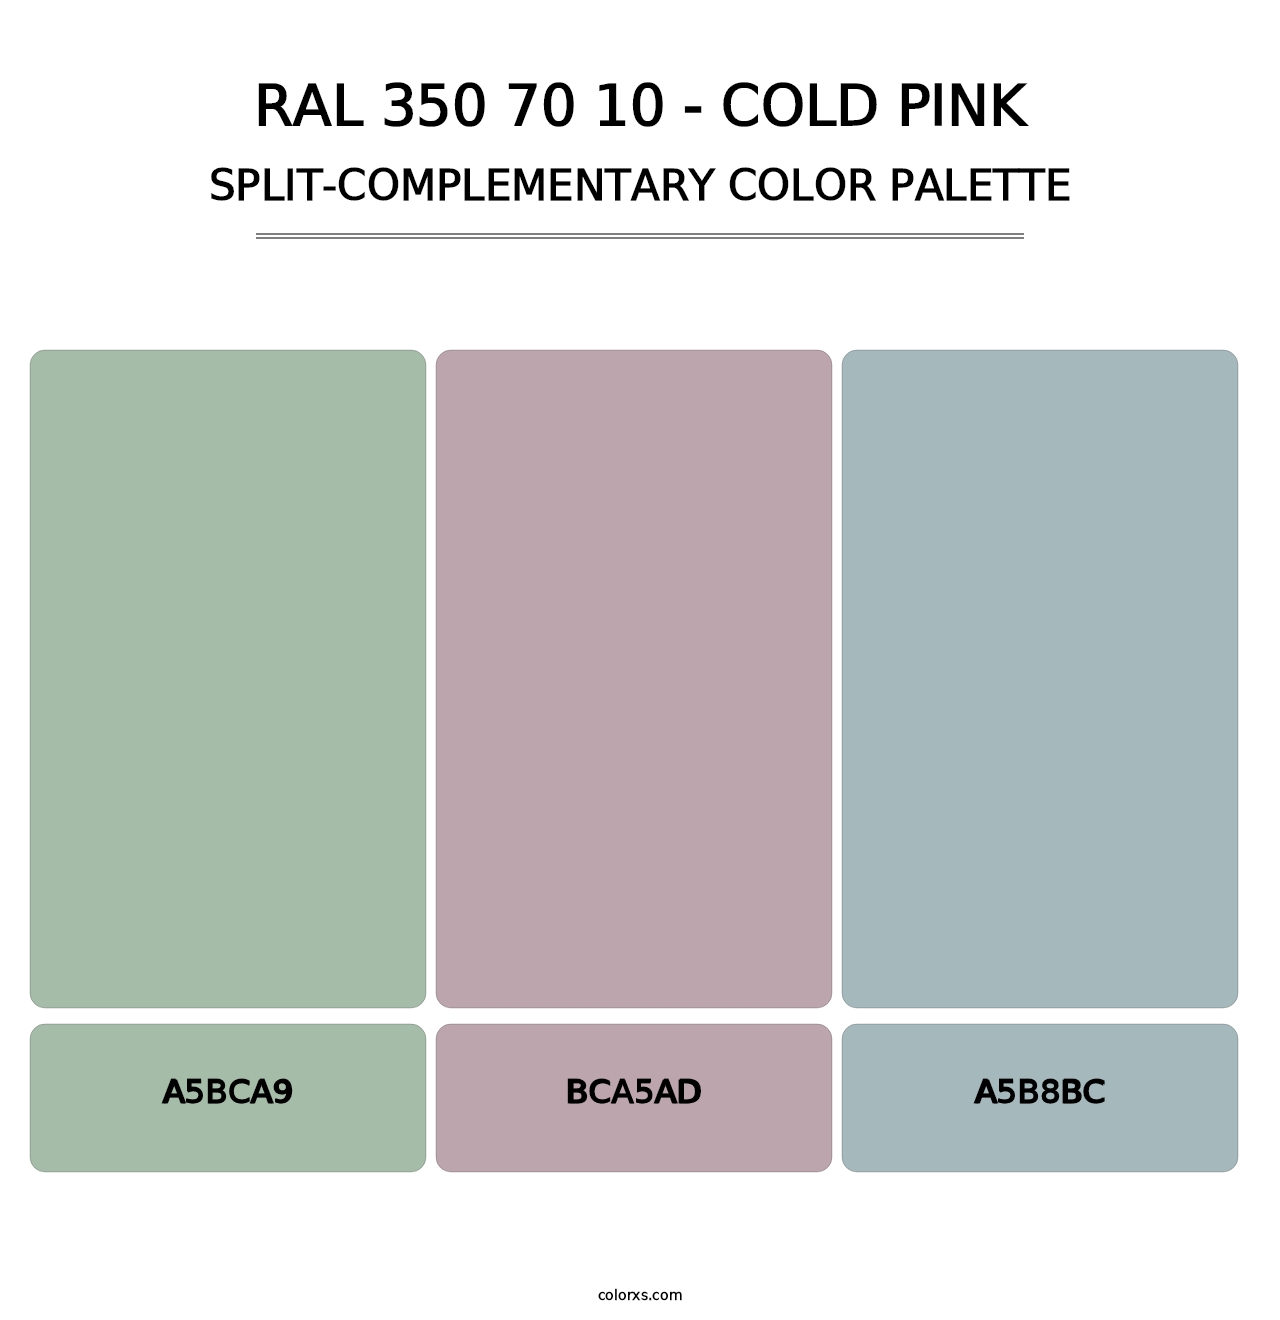 RAL 350 70 10 - Cold Pink - Split-Complementary Color Palette